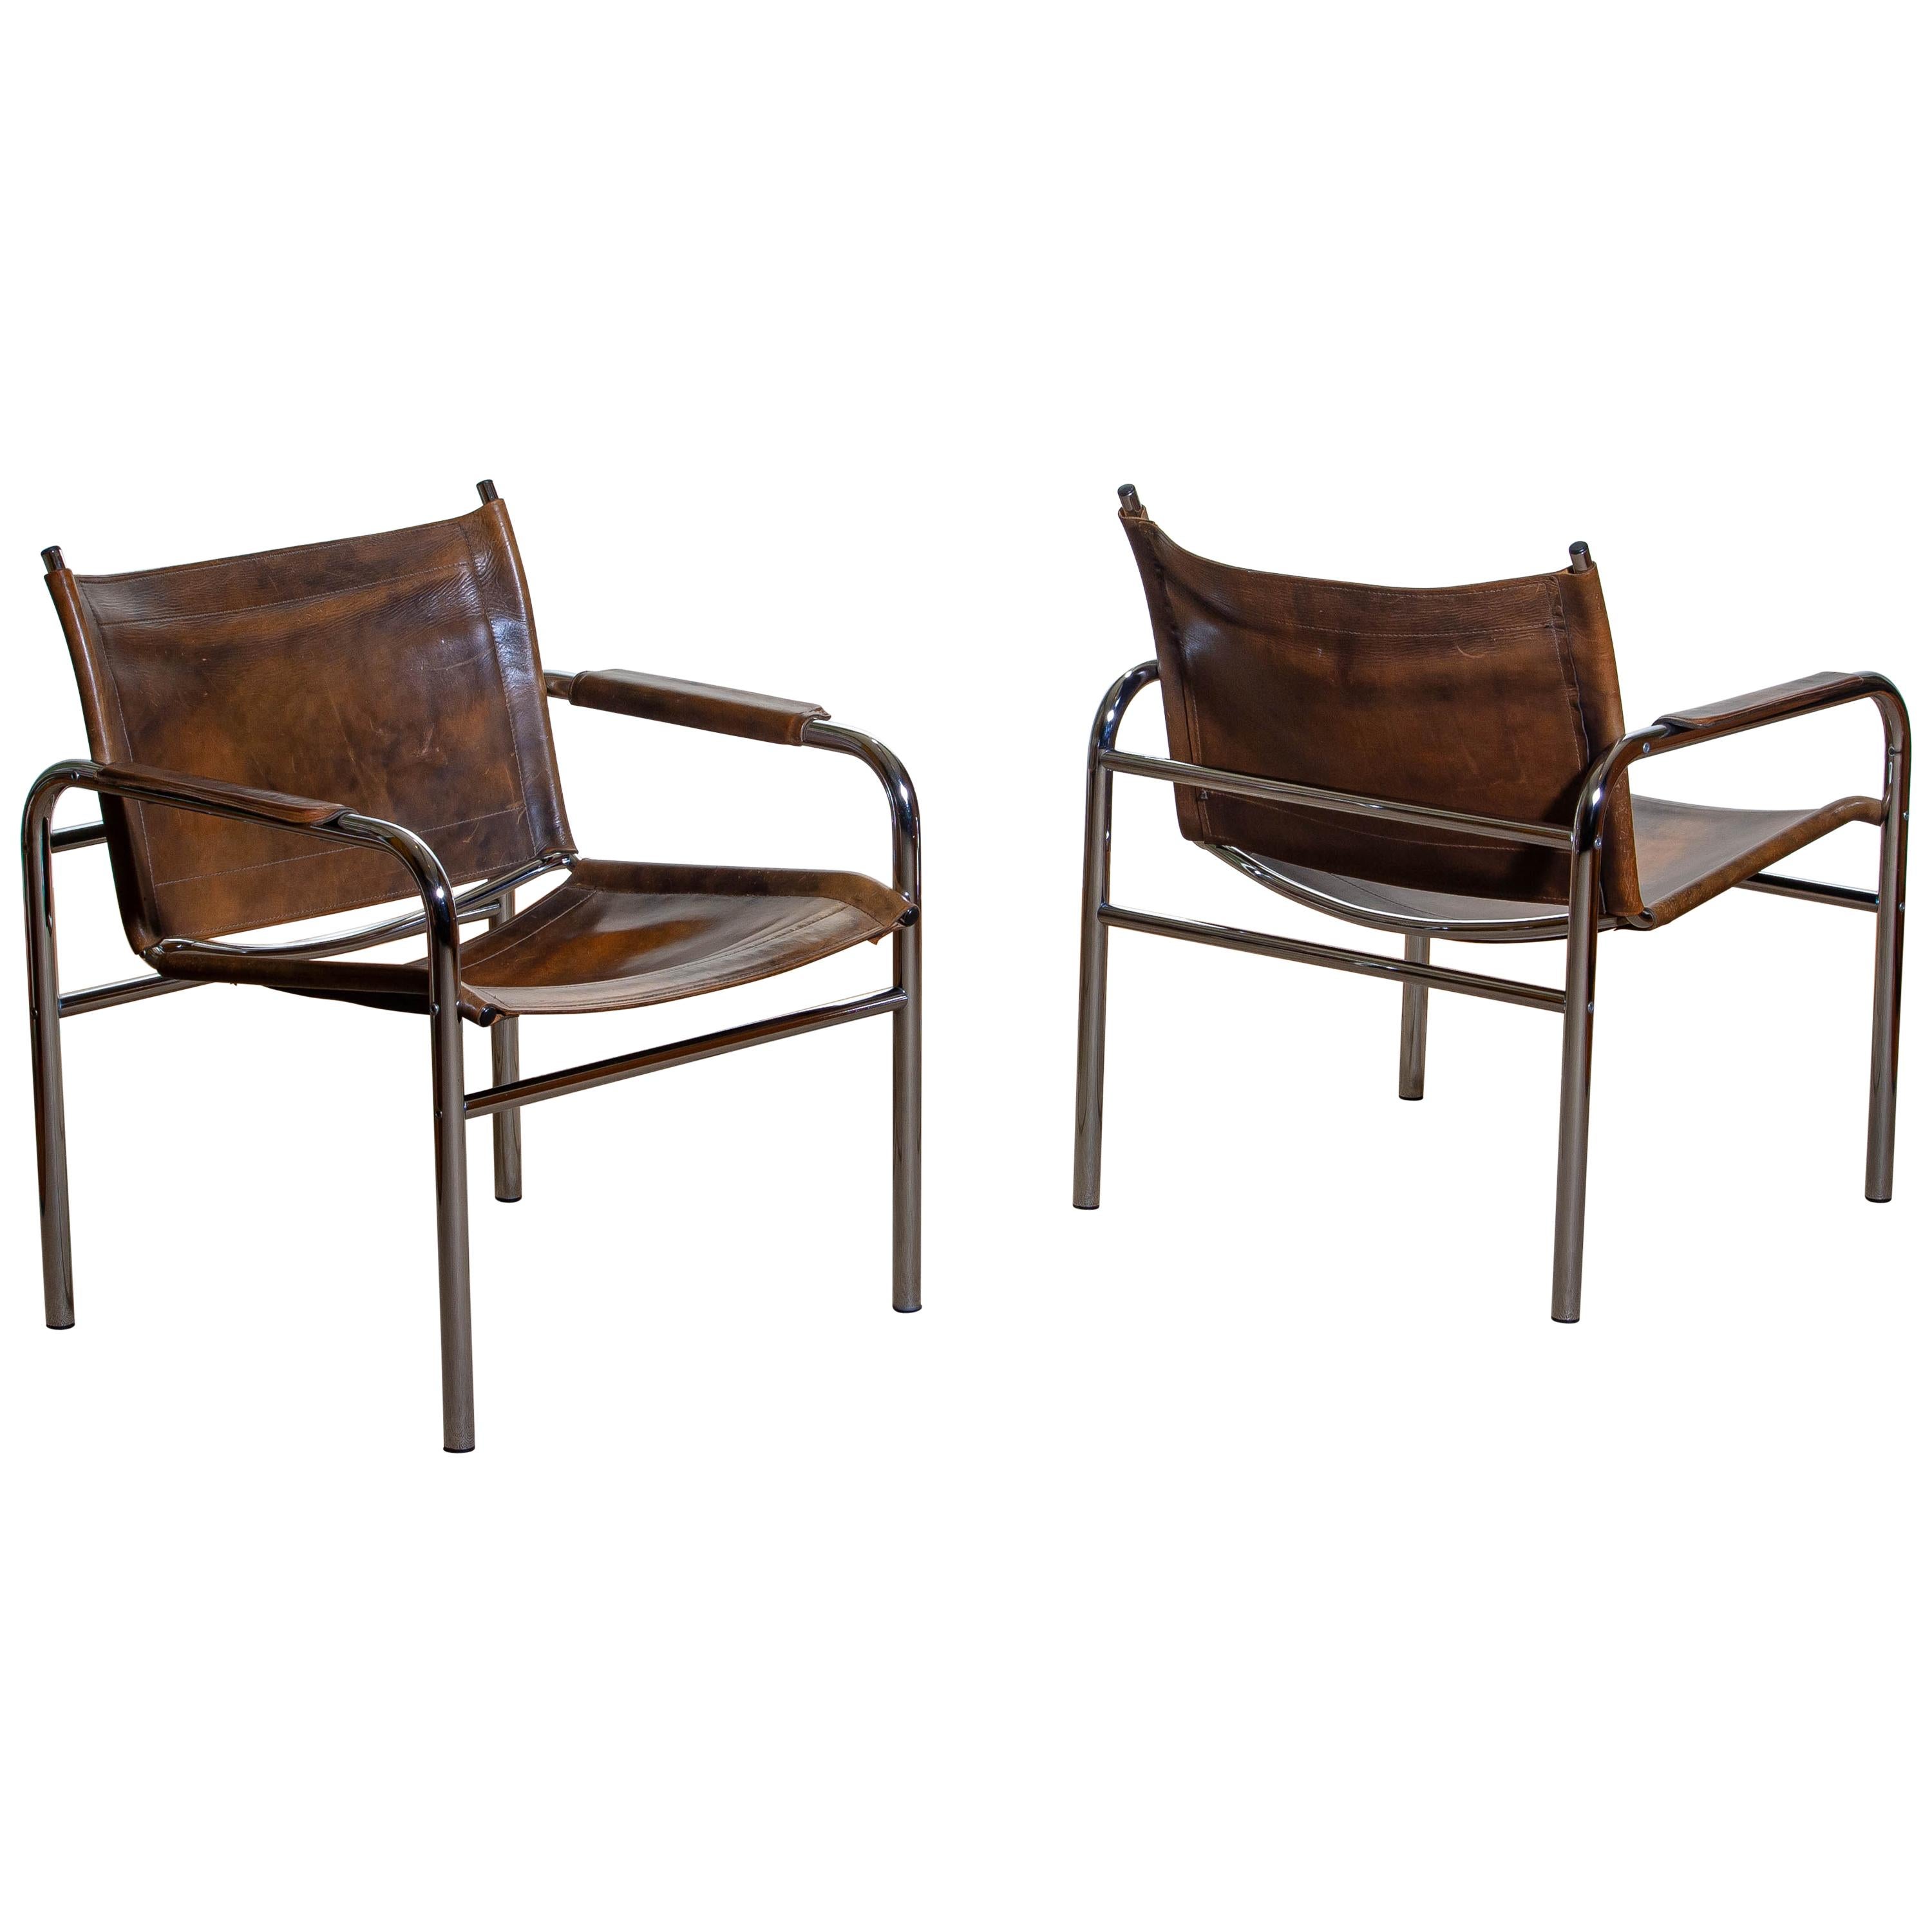 1980s, Pair of Leather and Tubular Steel Armchairs by Tord Björklund, Sweden In Good Condition In Silvolde, Gelderland